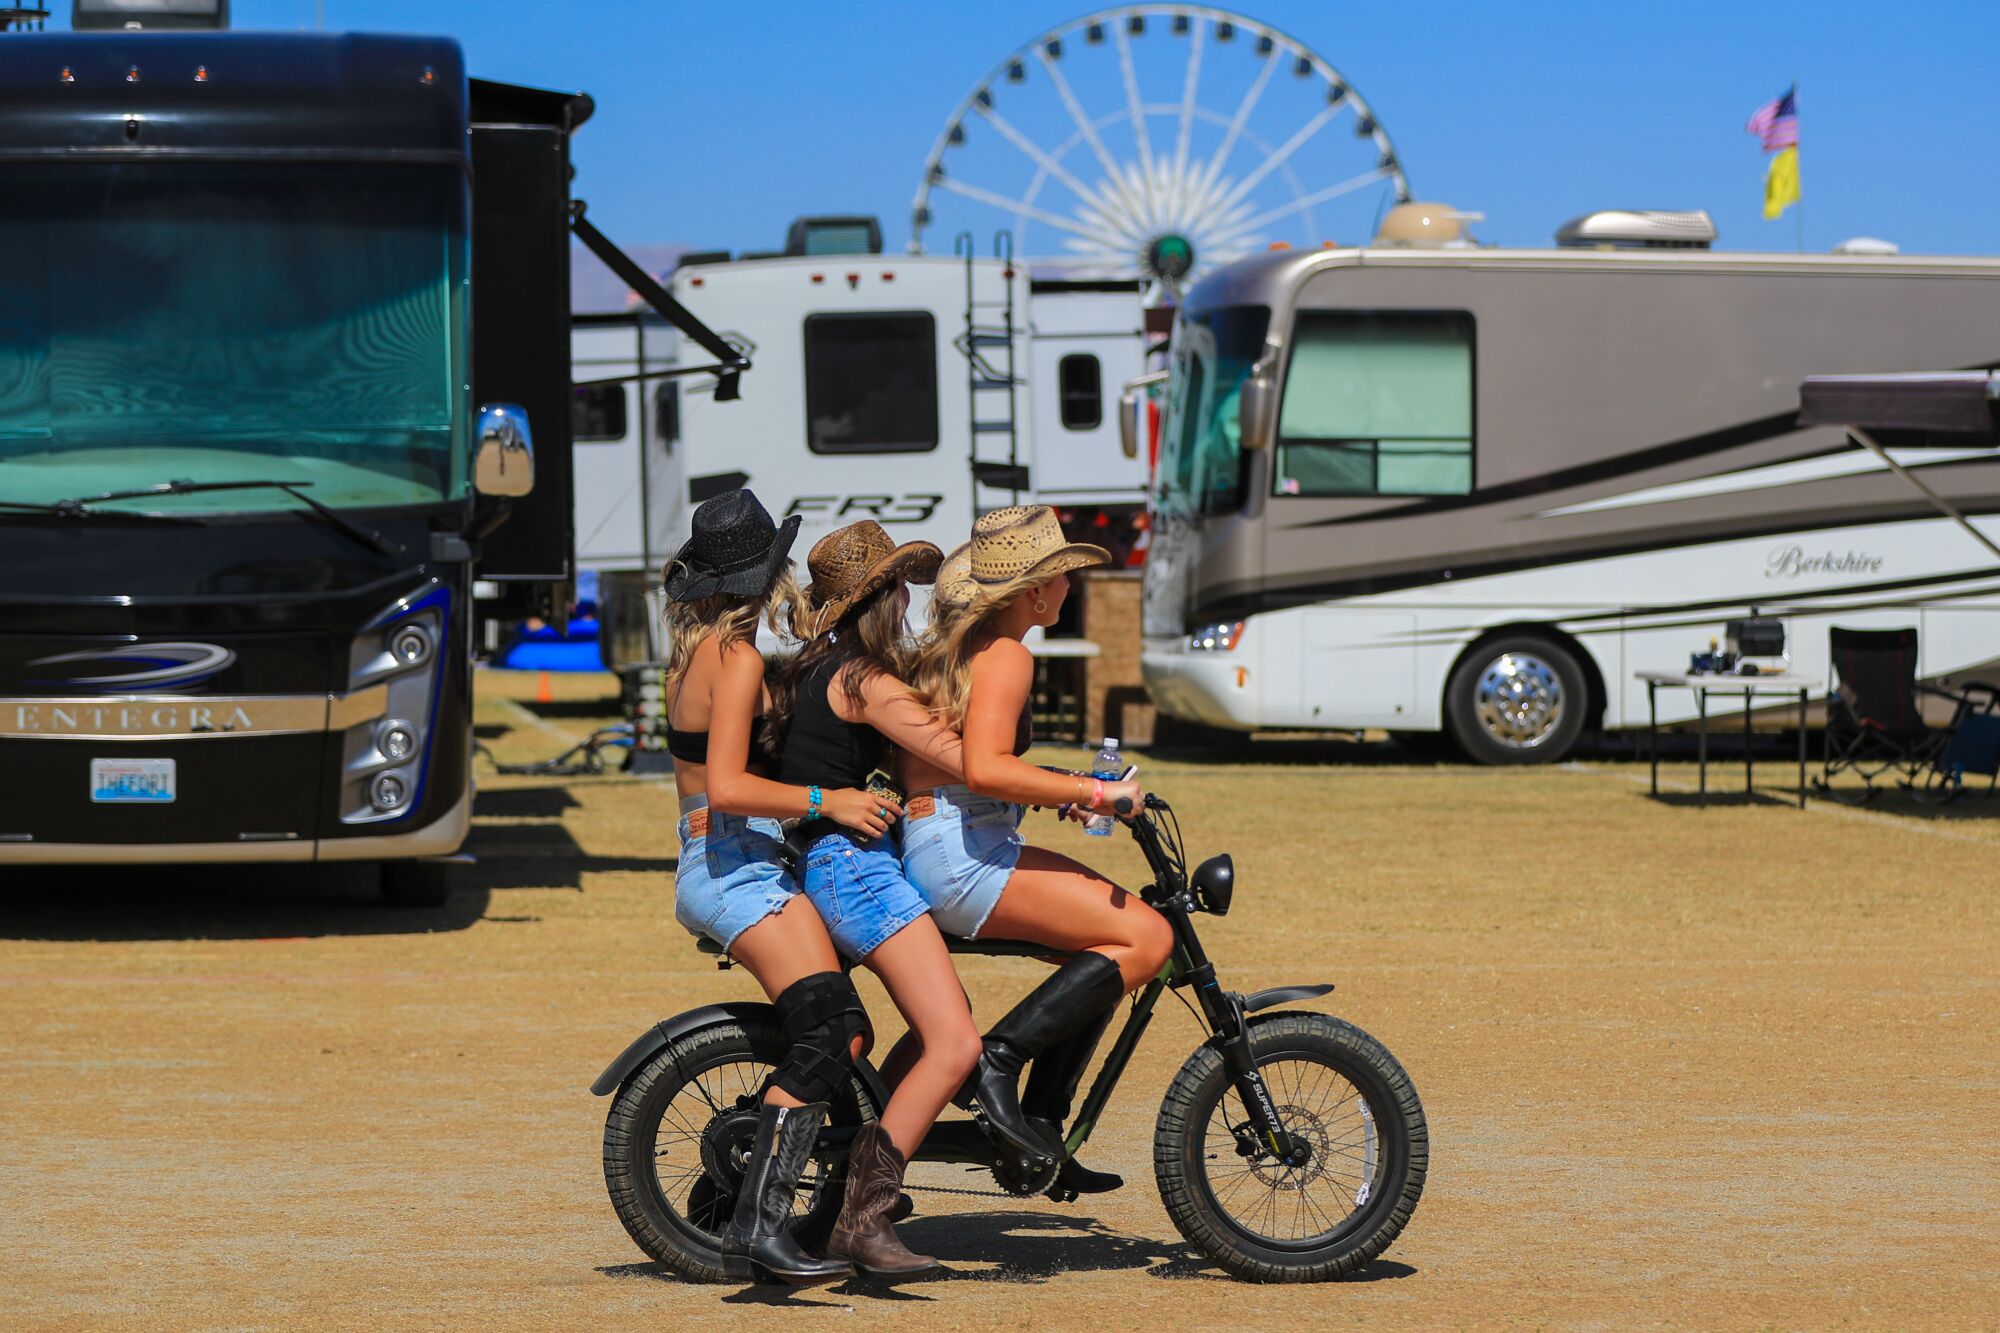 Three women in cowboy boots, hats and shorts ride an electric bike on the Stagecoach campground.